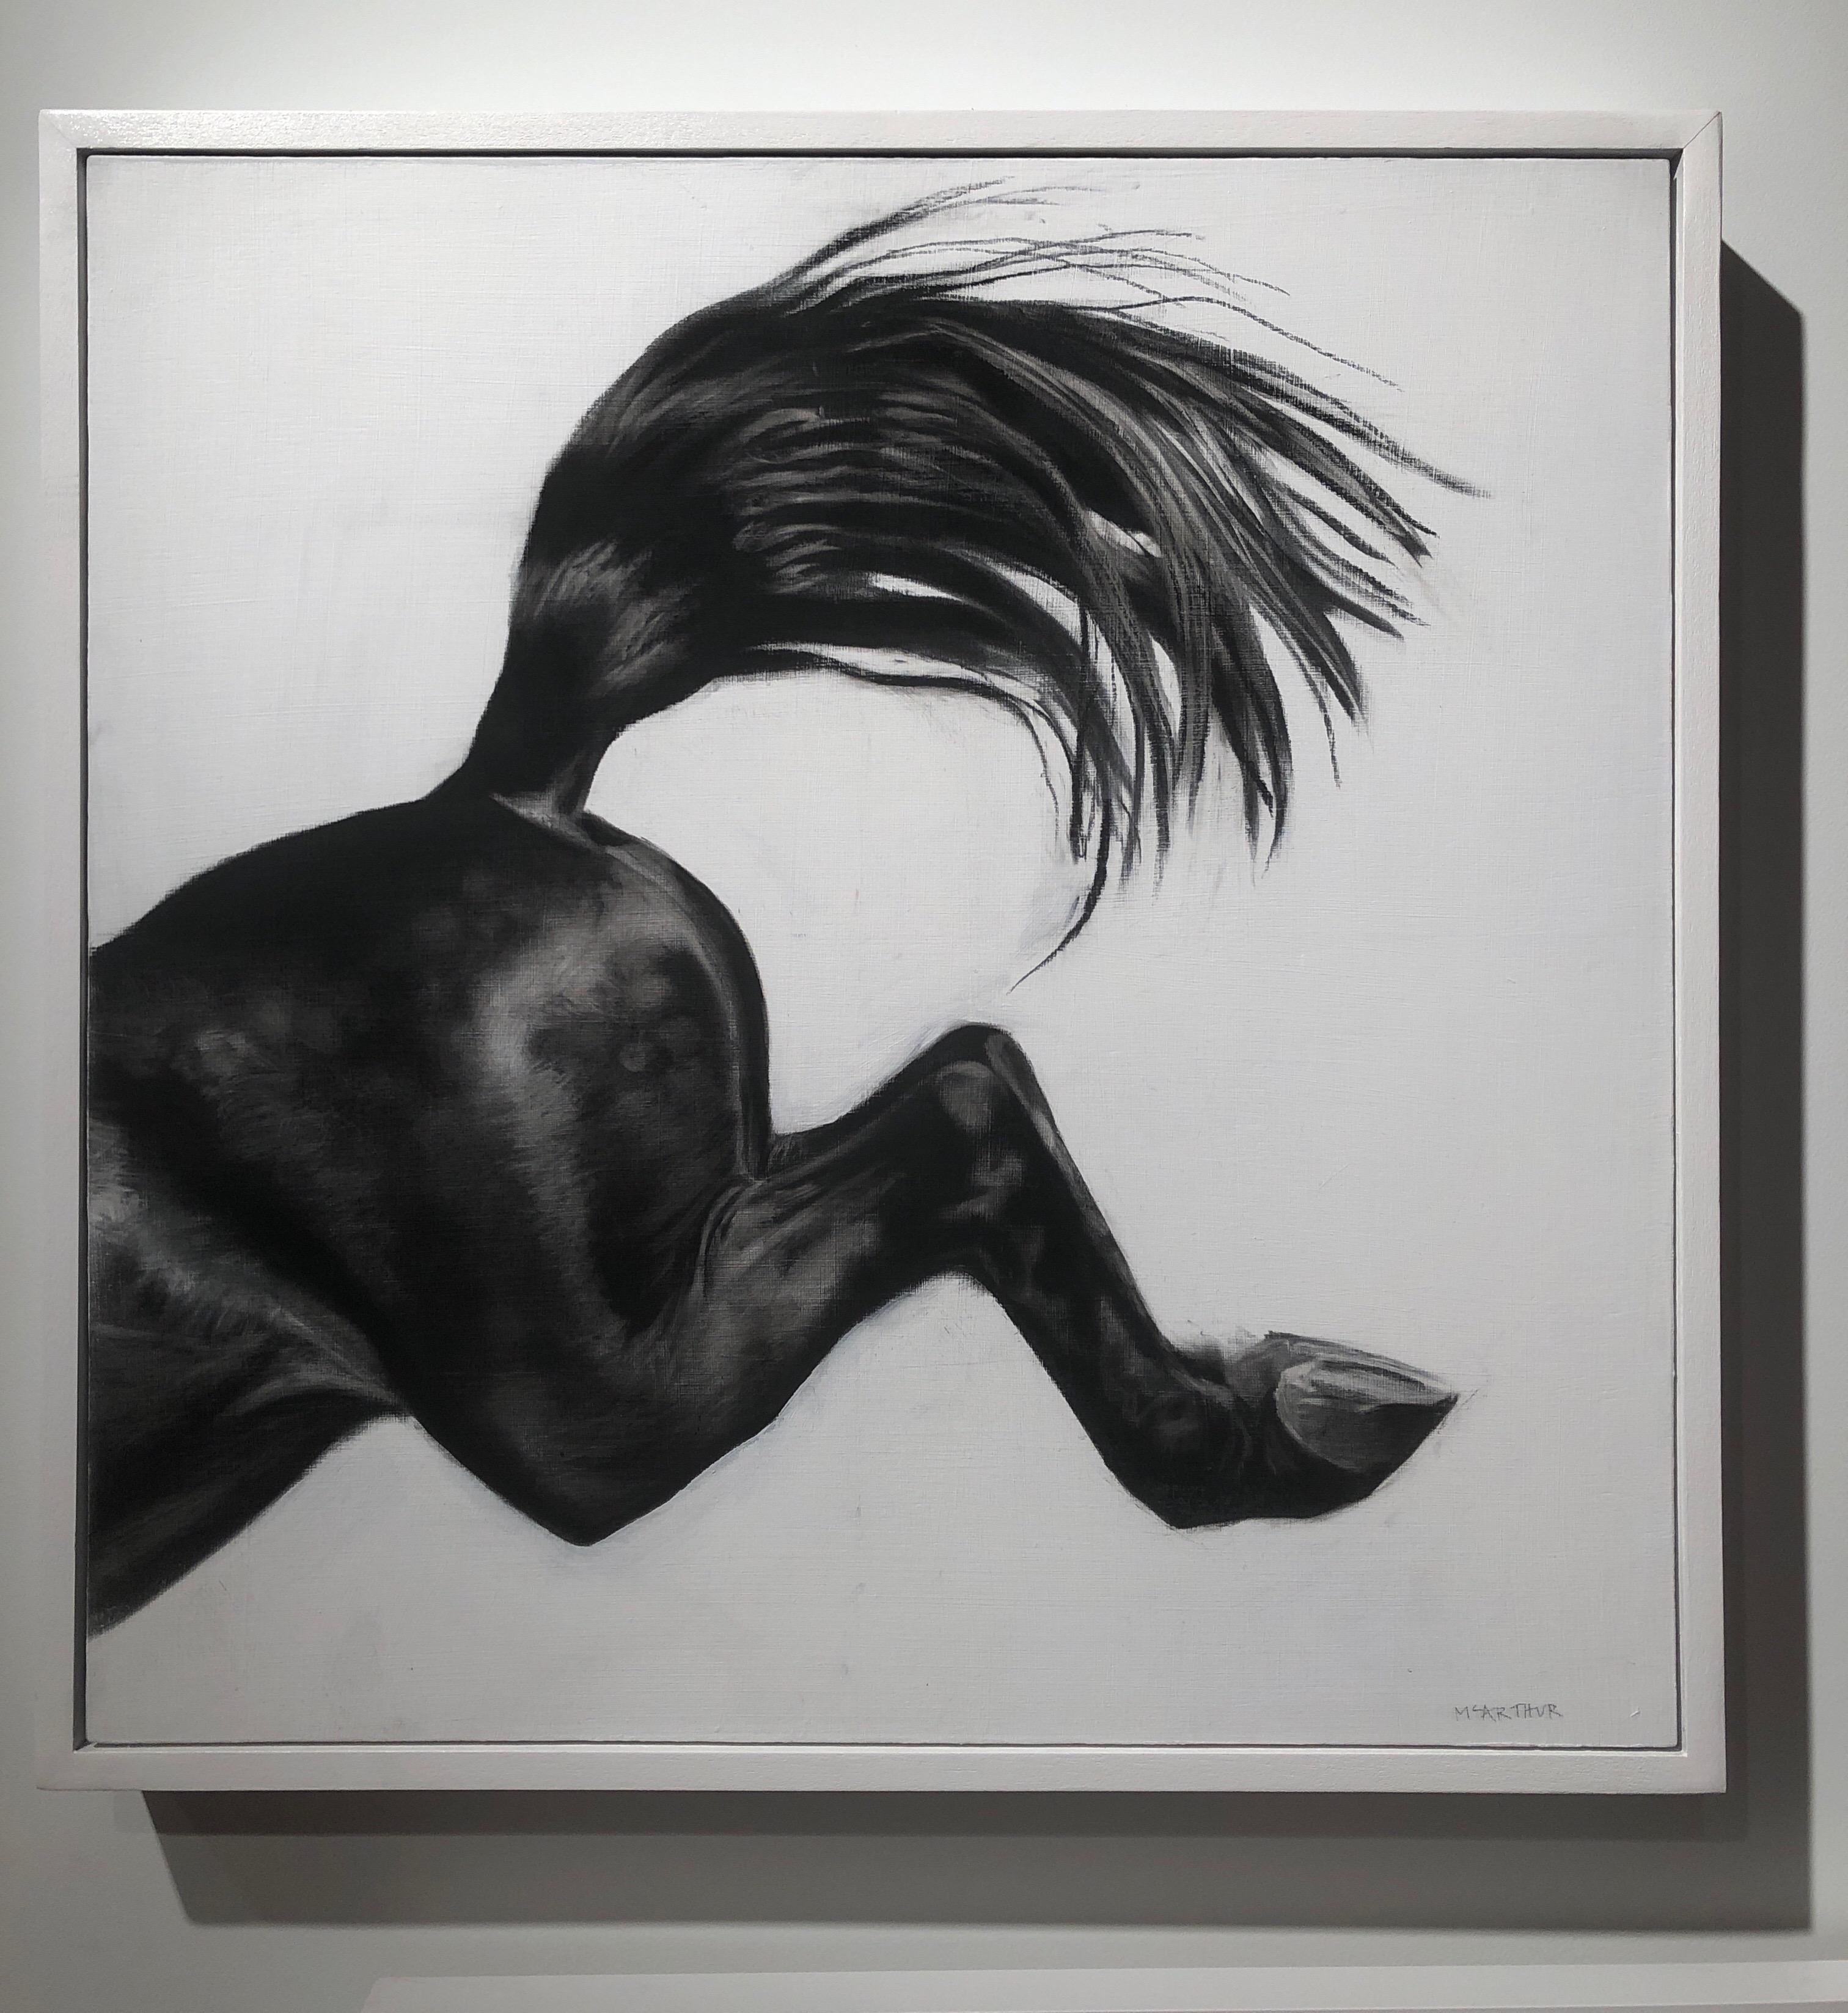 Over the Edge, Horse art by Patsy McArthur, Charcoal, gesso and acrylic on wood 2